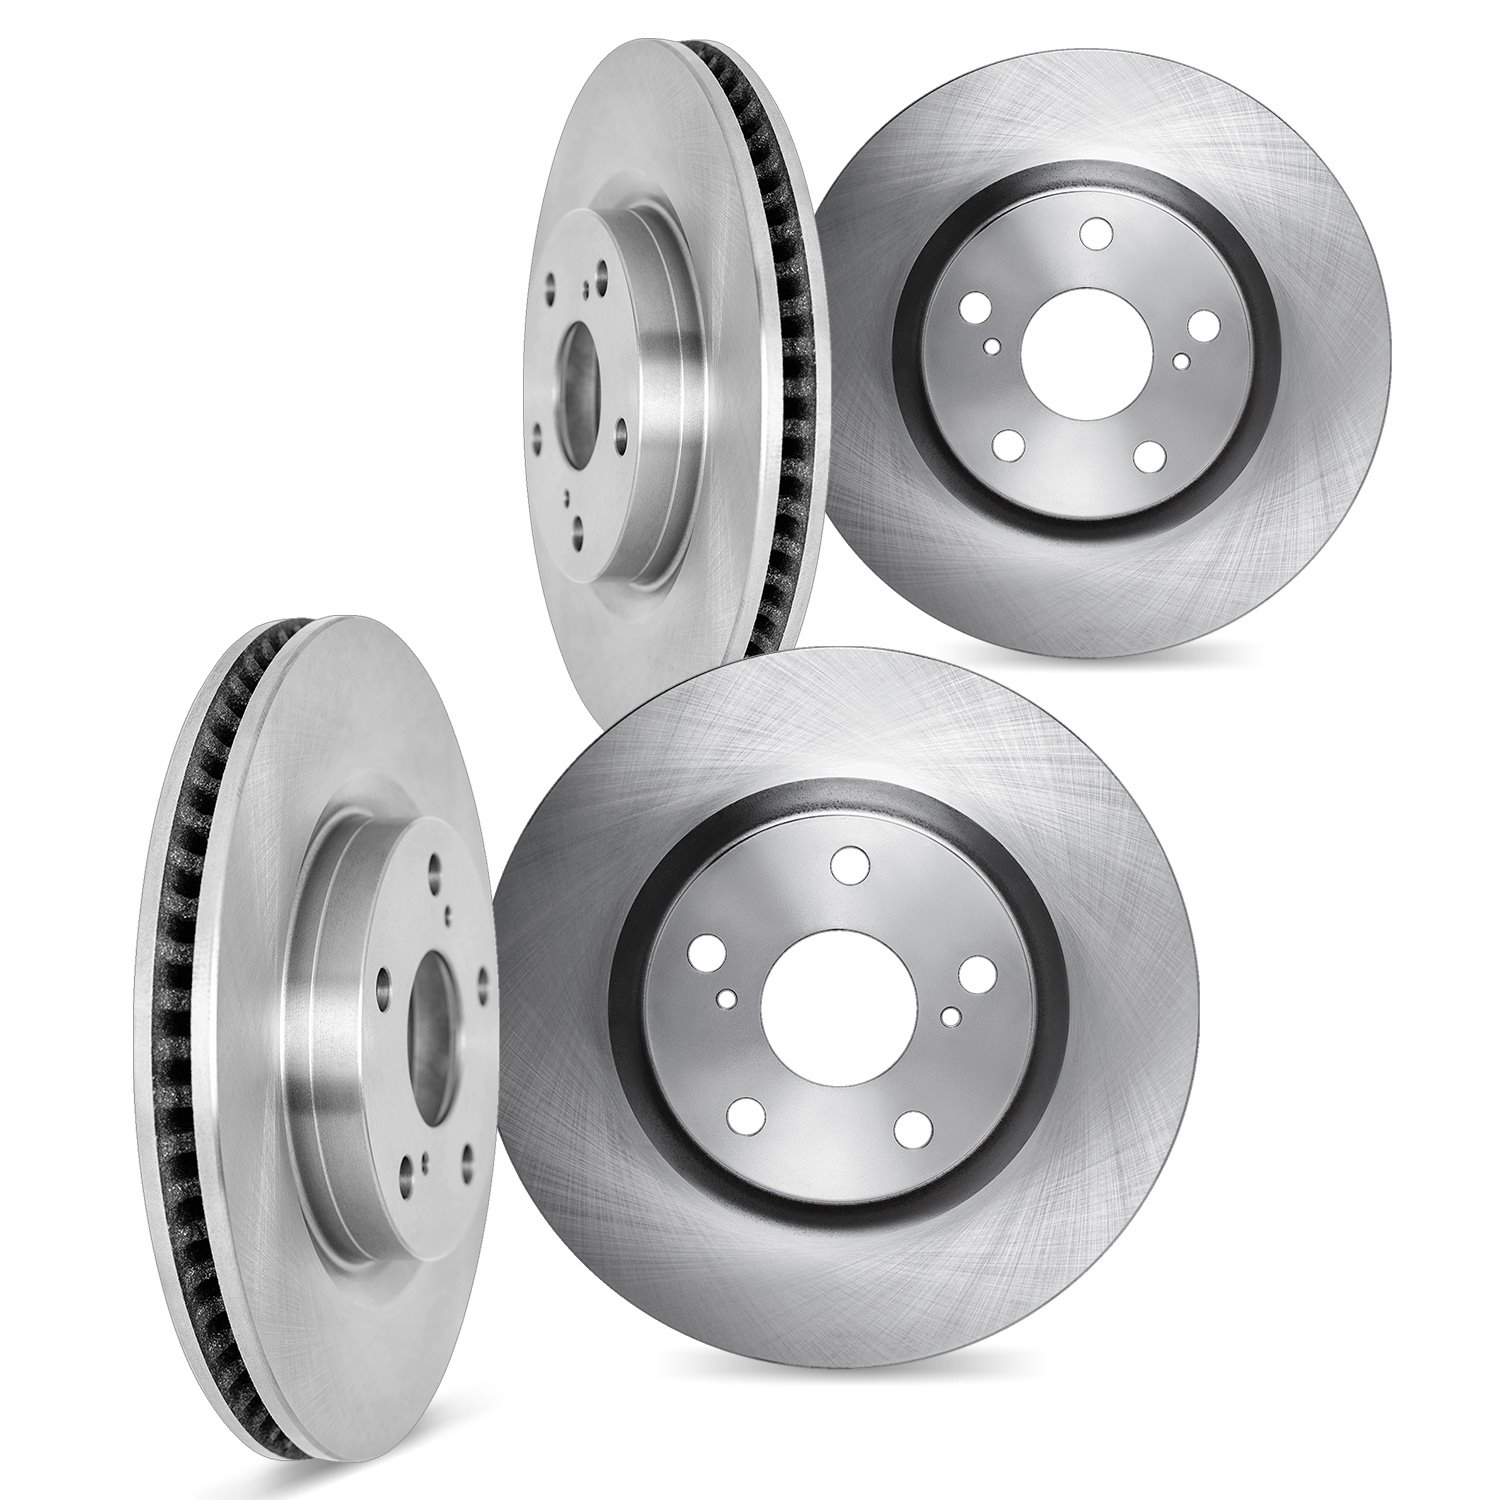 6004-73058 Brake Rotors, Fits Select Audi/Volkswagen, Position: Front and Rear